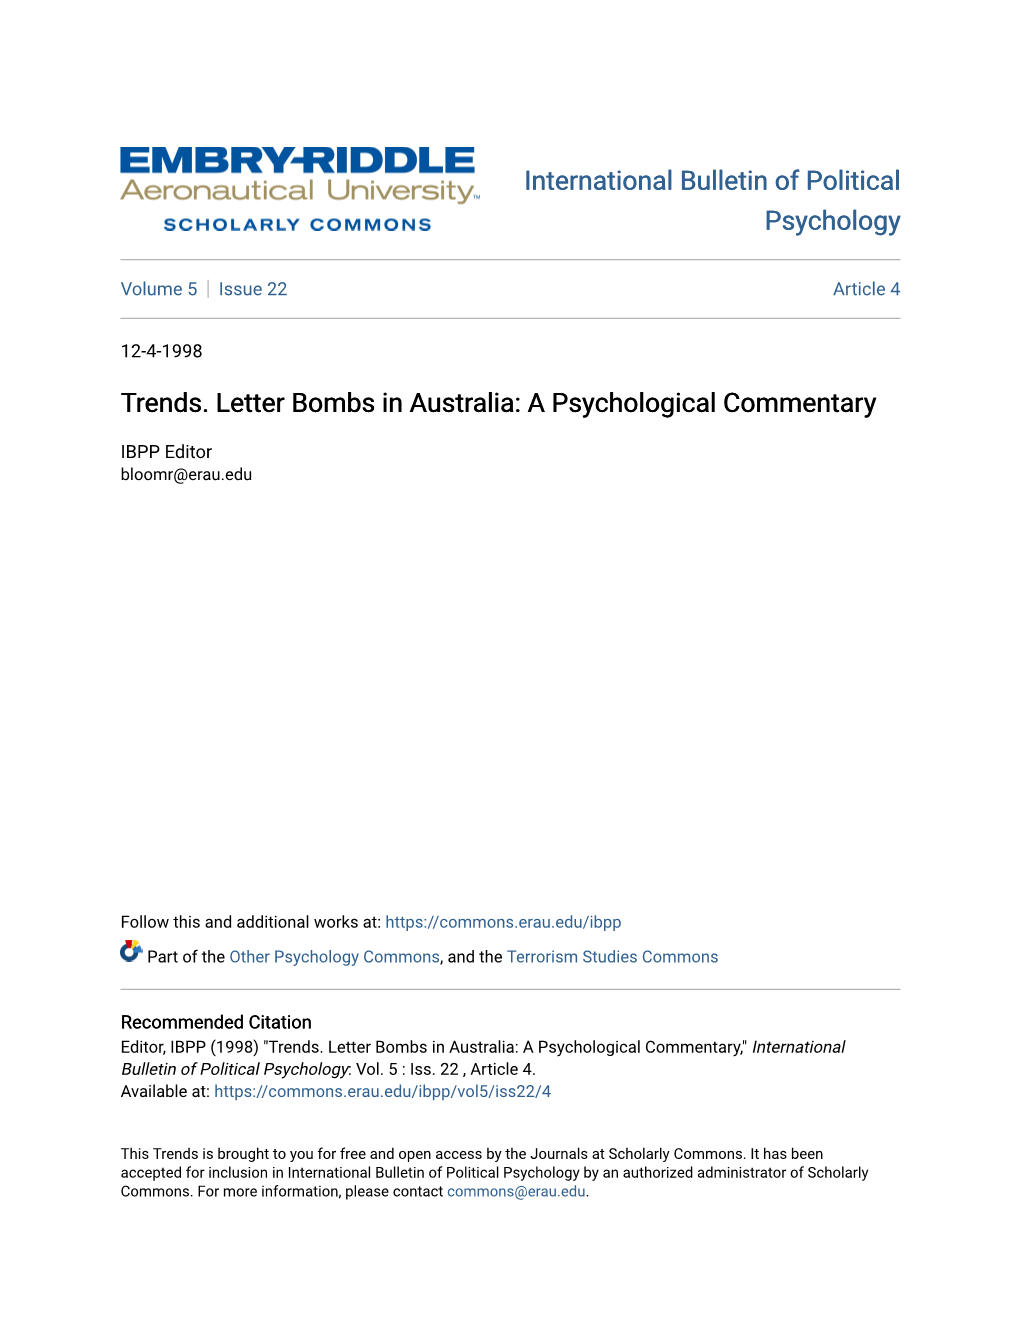 Trends. Letter Bombs in Australia: a Psychological Commentary